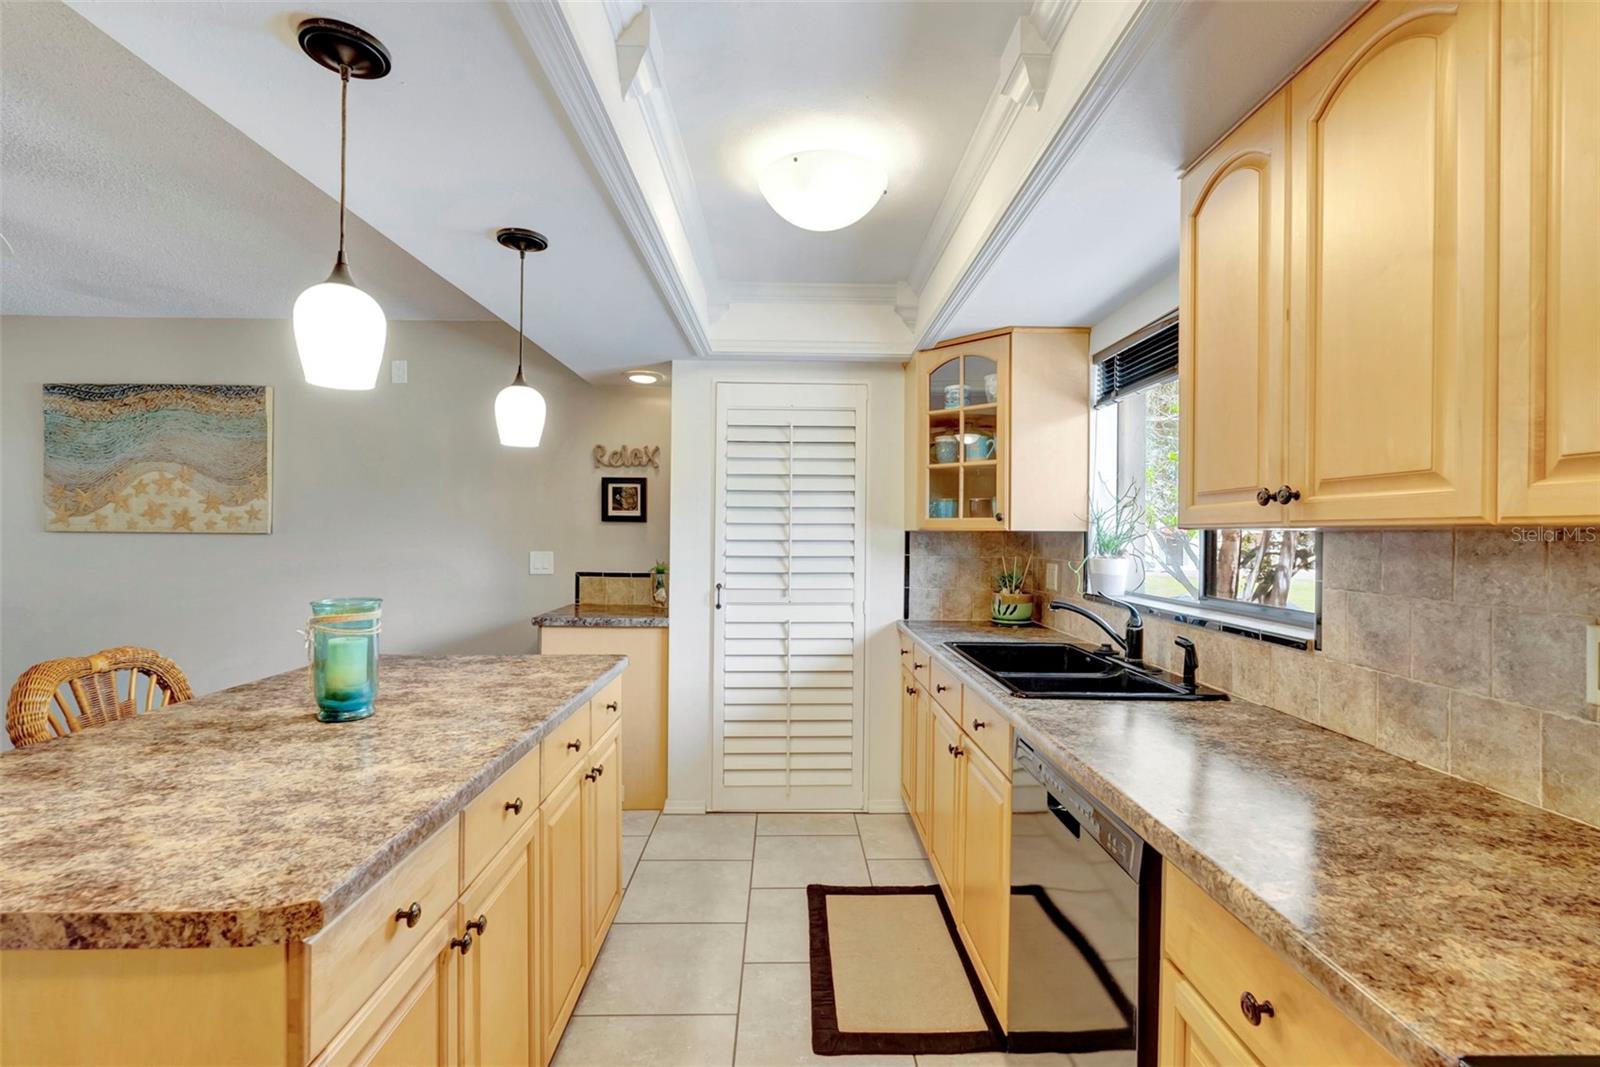 The kitchen is bright and spacious for entertaining and has a pantry.